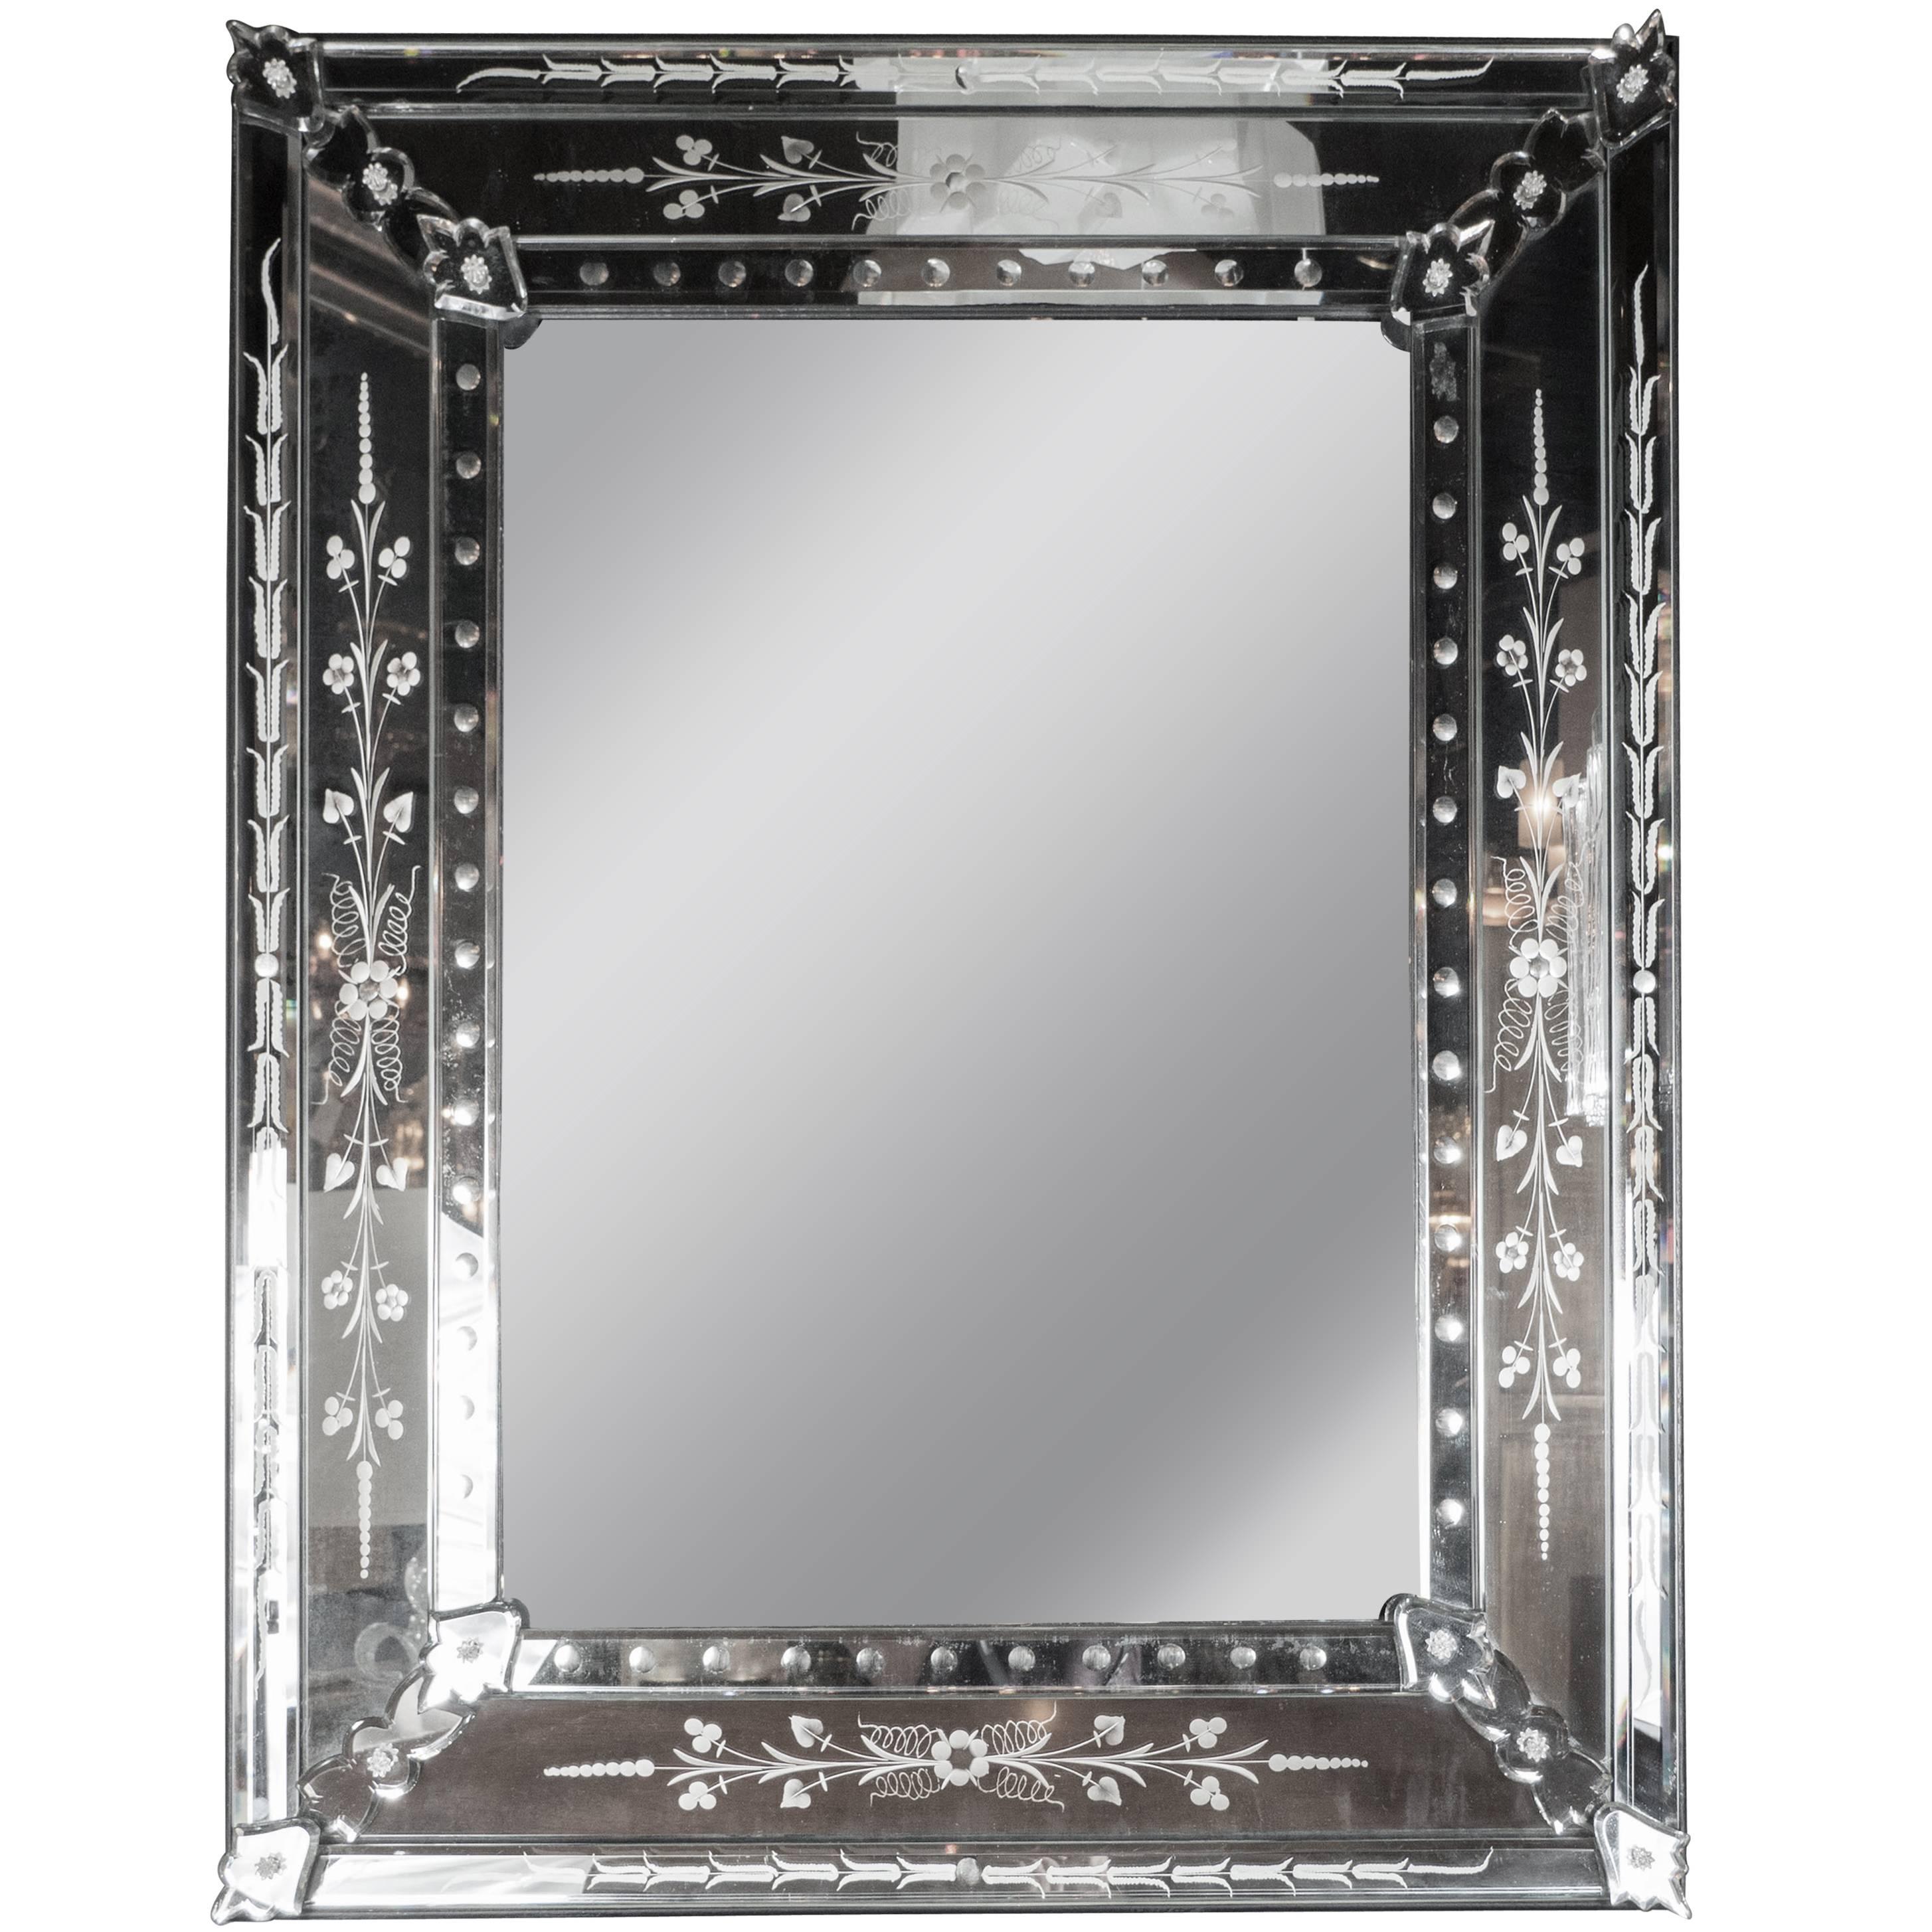 1940s Hollywood Style Venetian Mirror with Reverse Etched Detailing